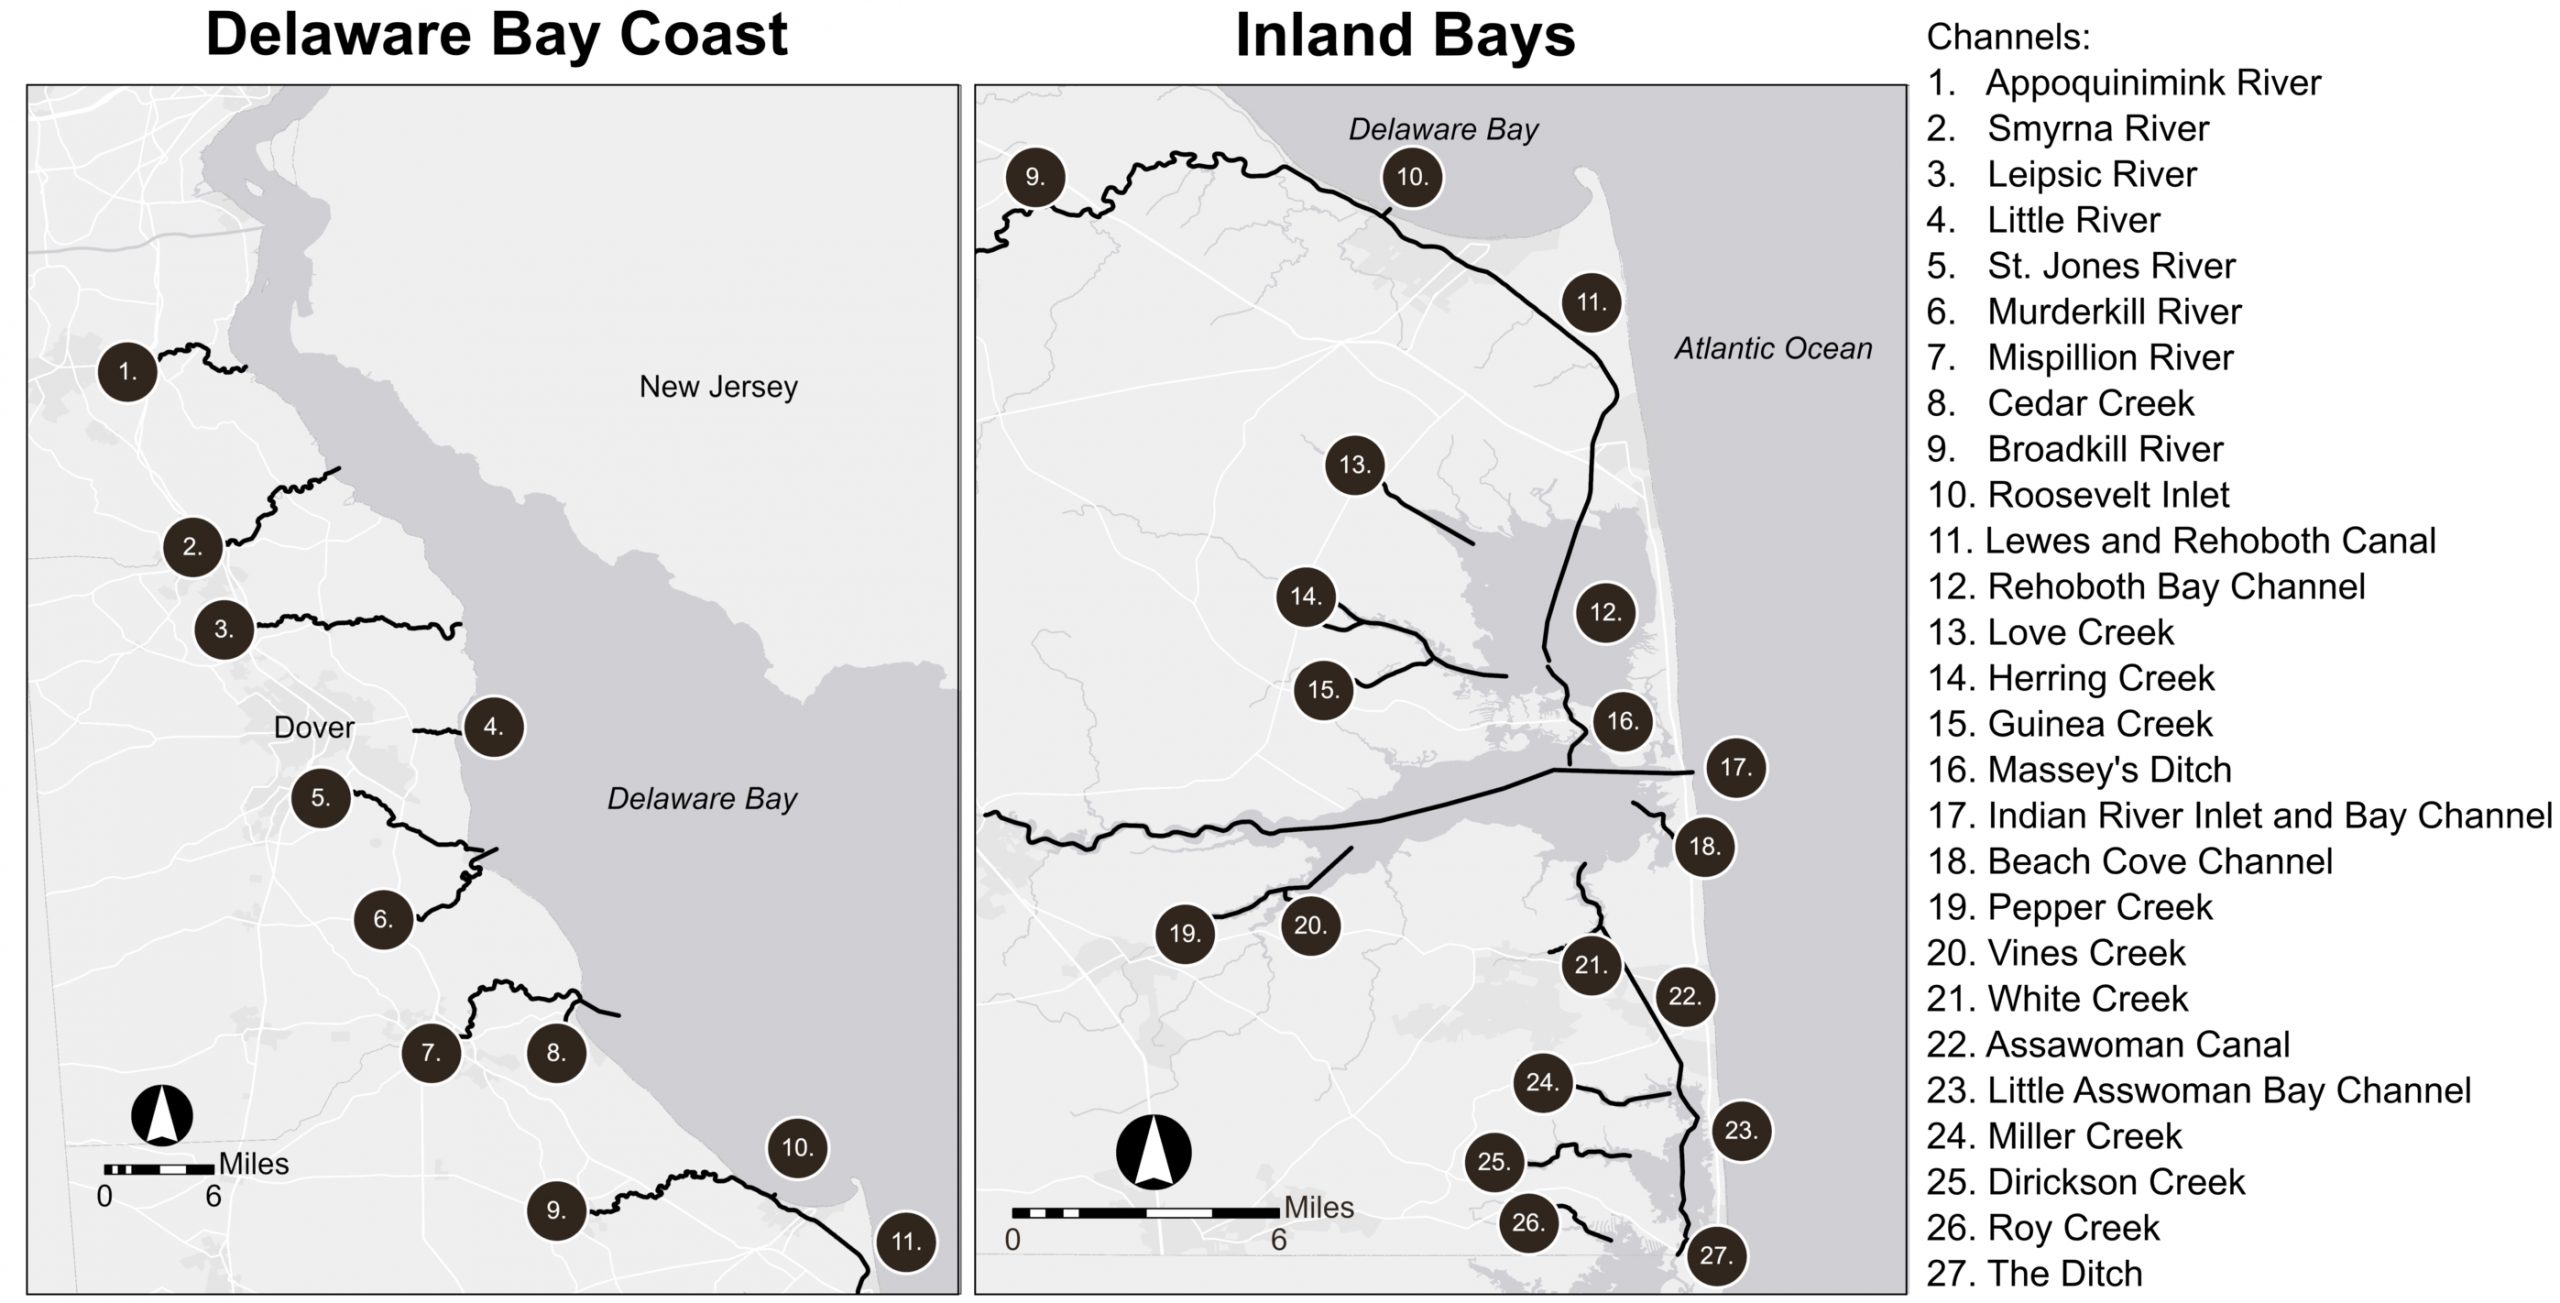 Maps showing channel locations along the Delaware Bay coast and in the Inland Bays of Delaware.